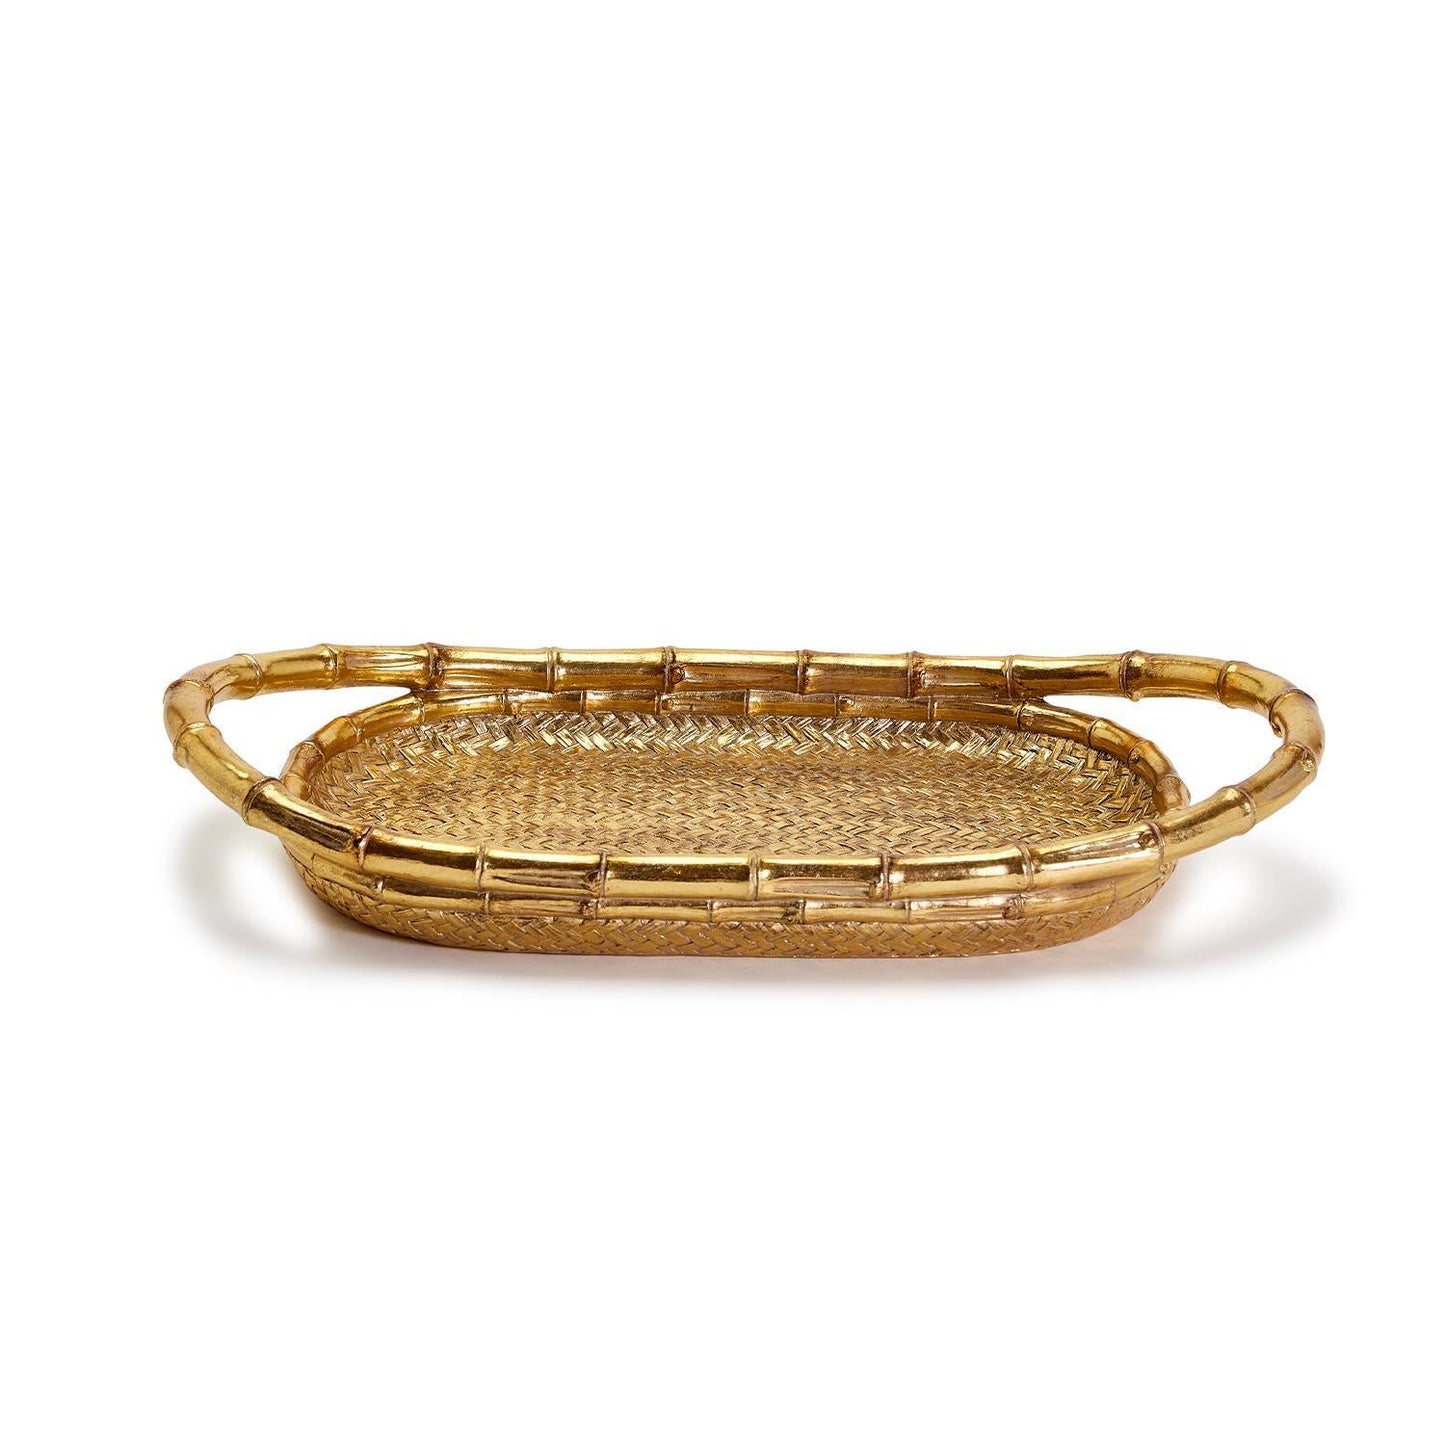 GOLD FAUX BAMBOO TRAY - Gaines Jewelers